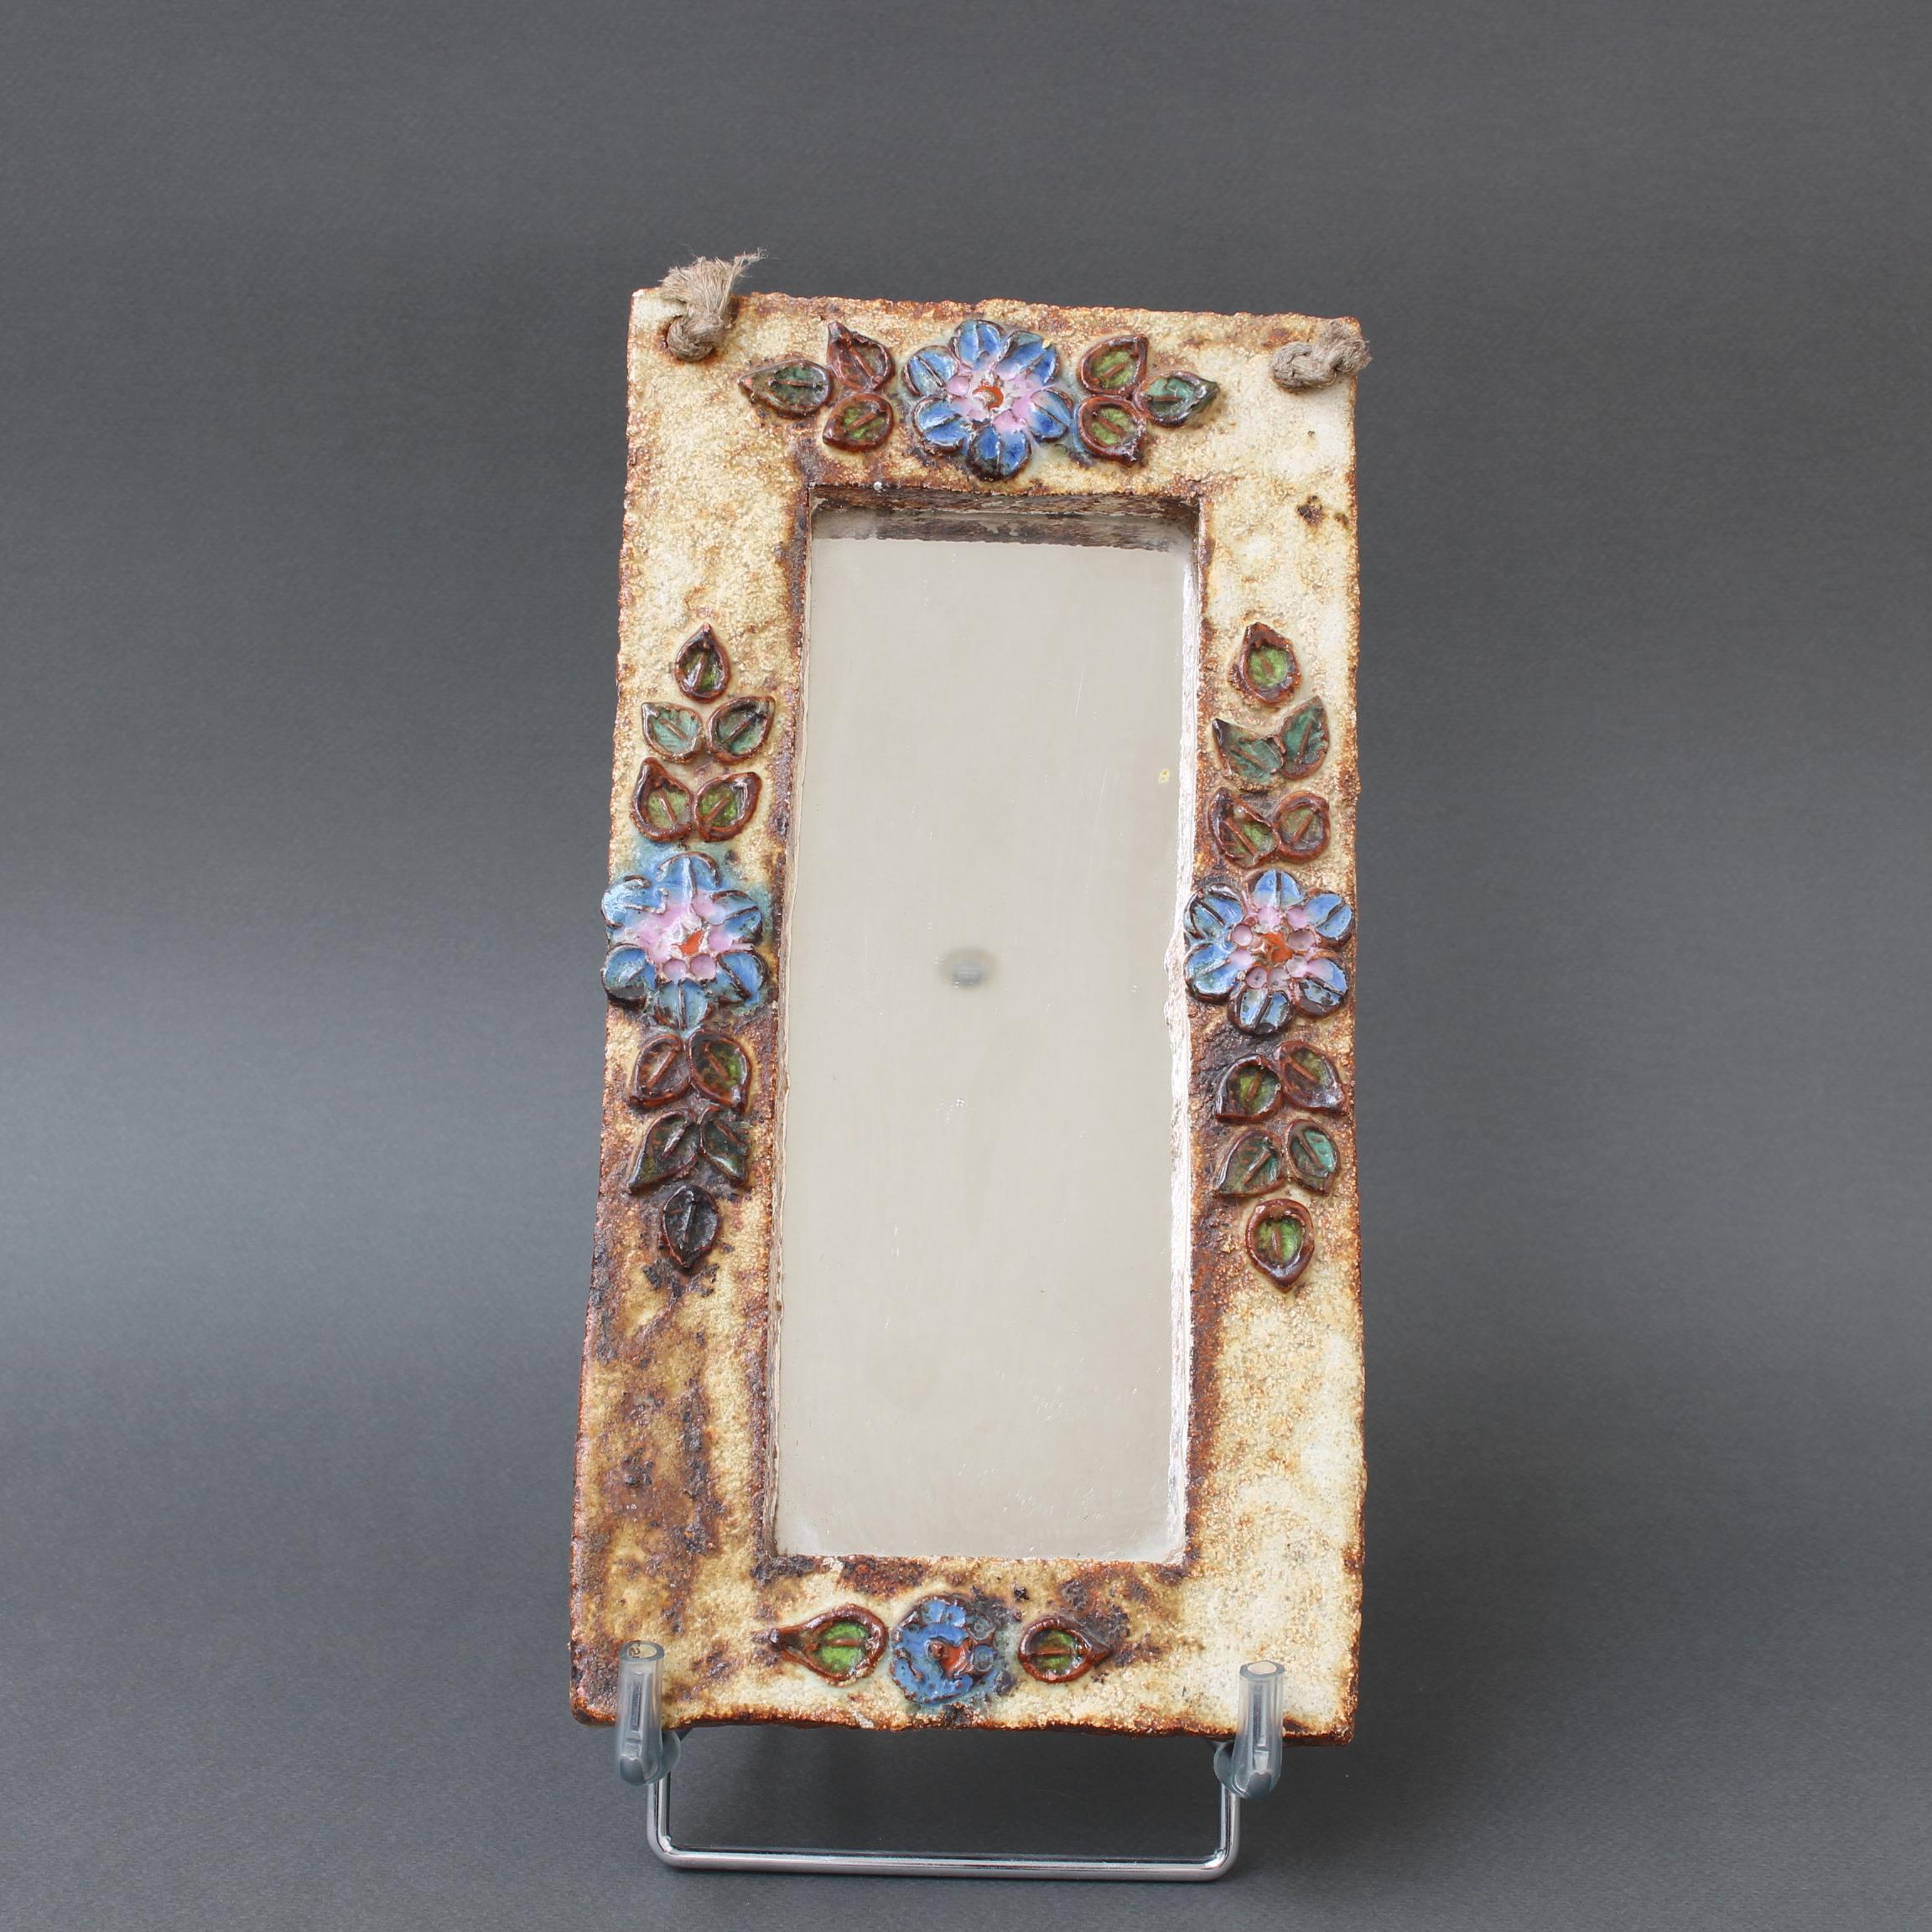 Ceramic flower-motif wall mirror with glazed leaves by La Roue, Vallauris, France (circa 1960s). A charming, decorative piece with rustic but colourful details surrounding the narrow, rectangular mirror. The back side has a hanging string